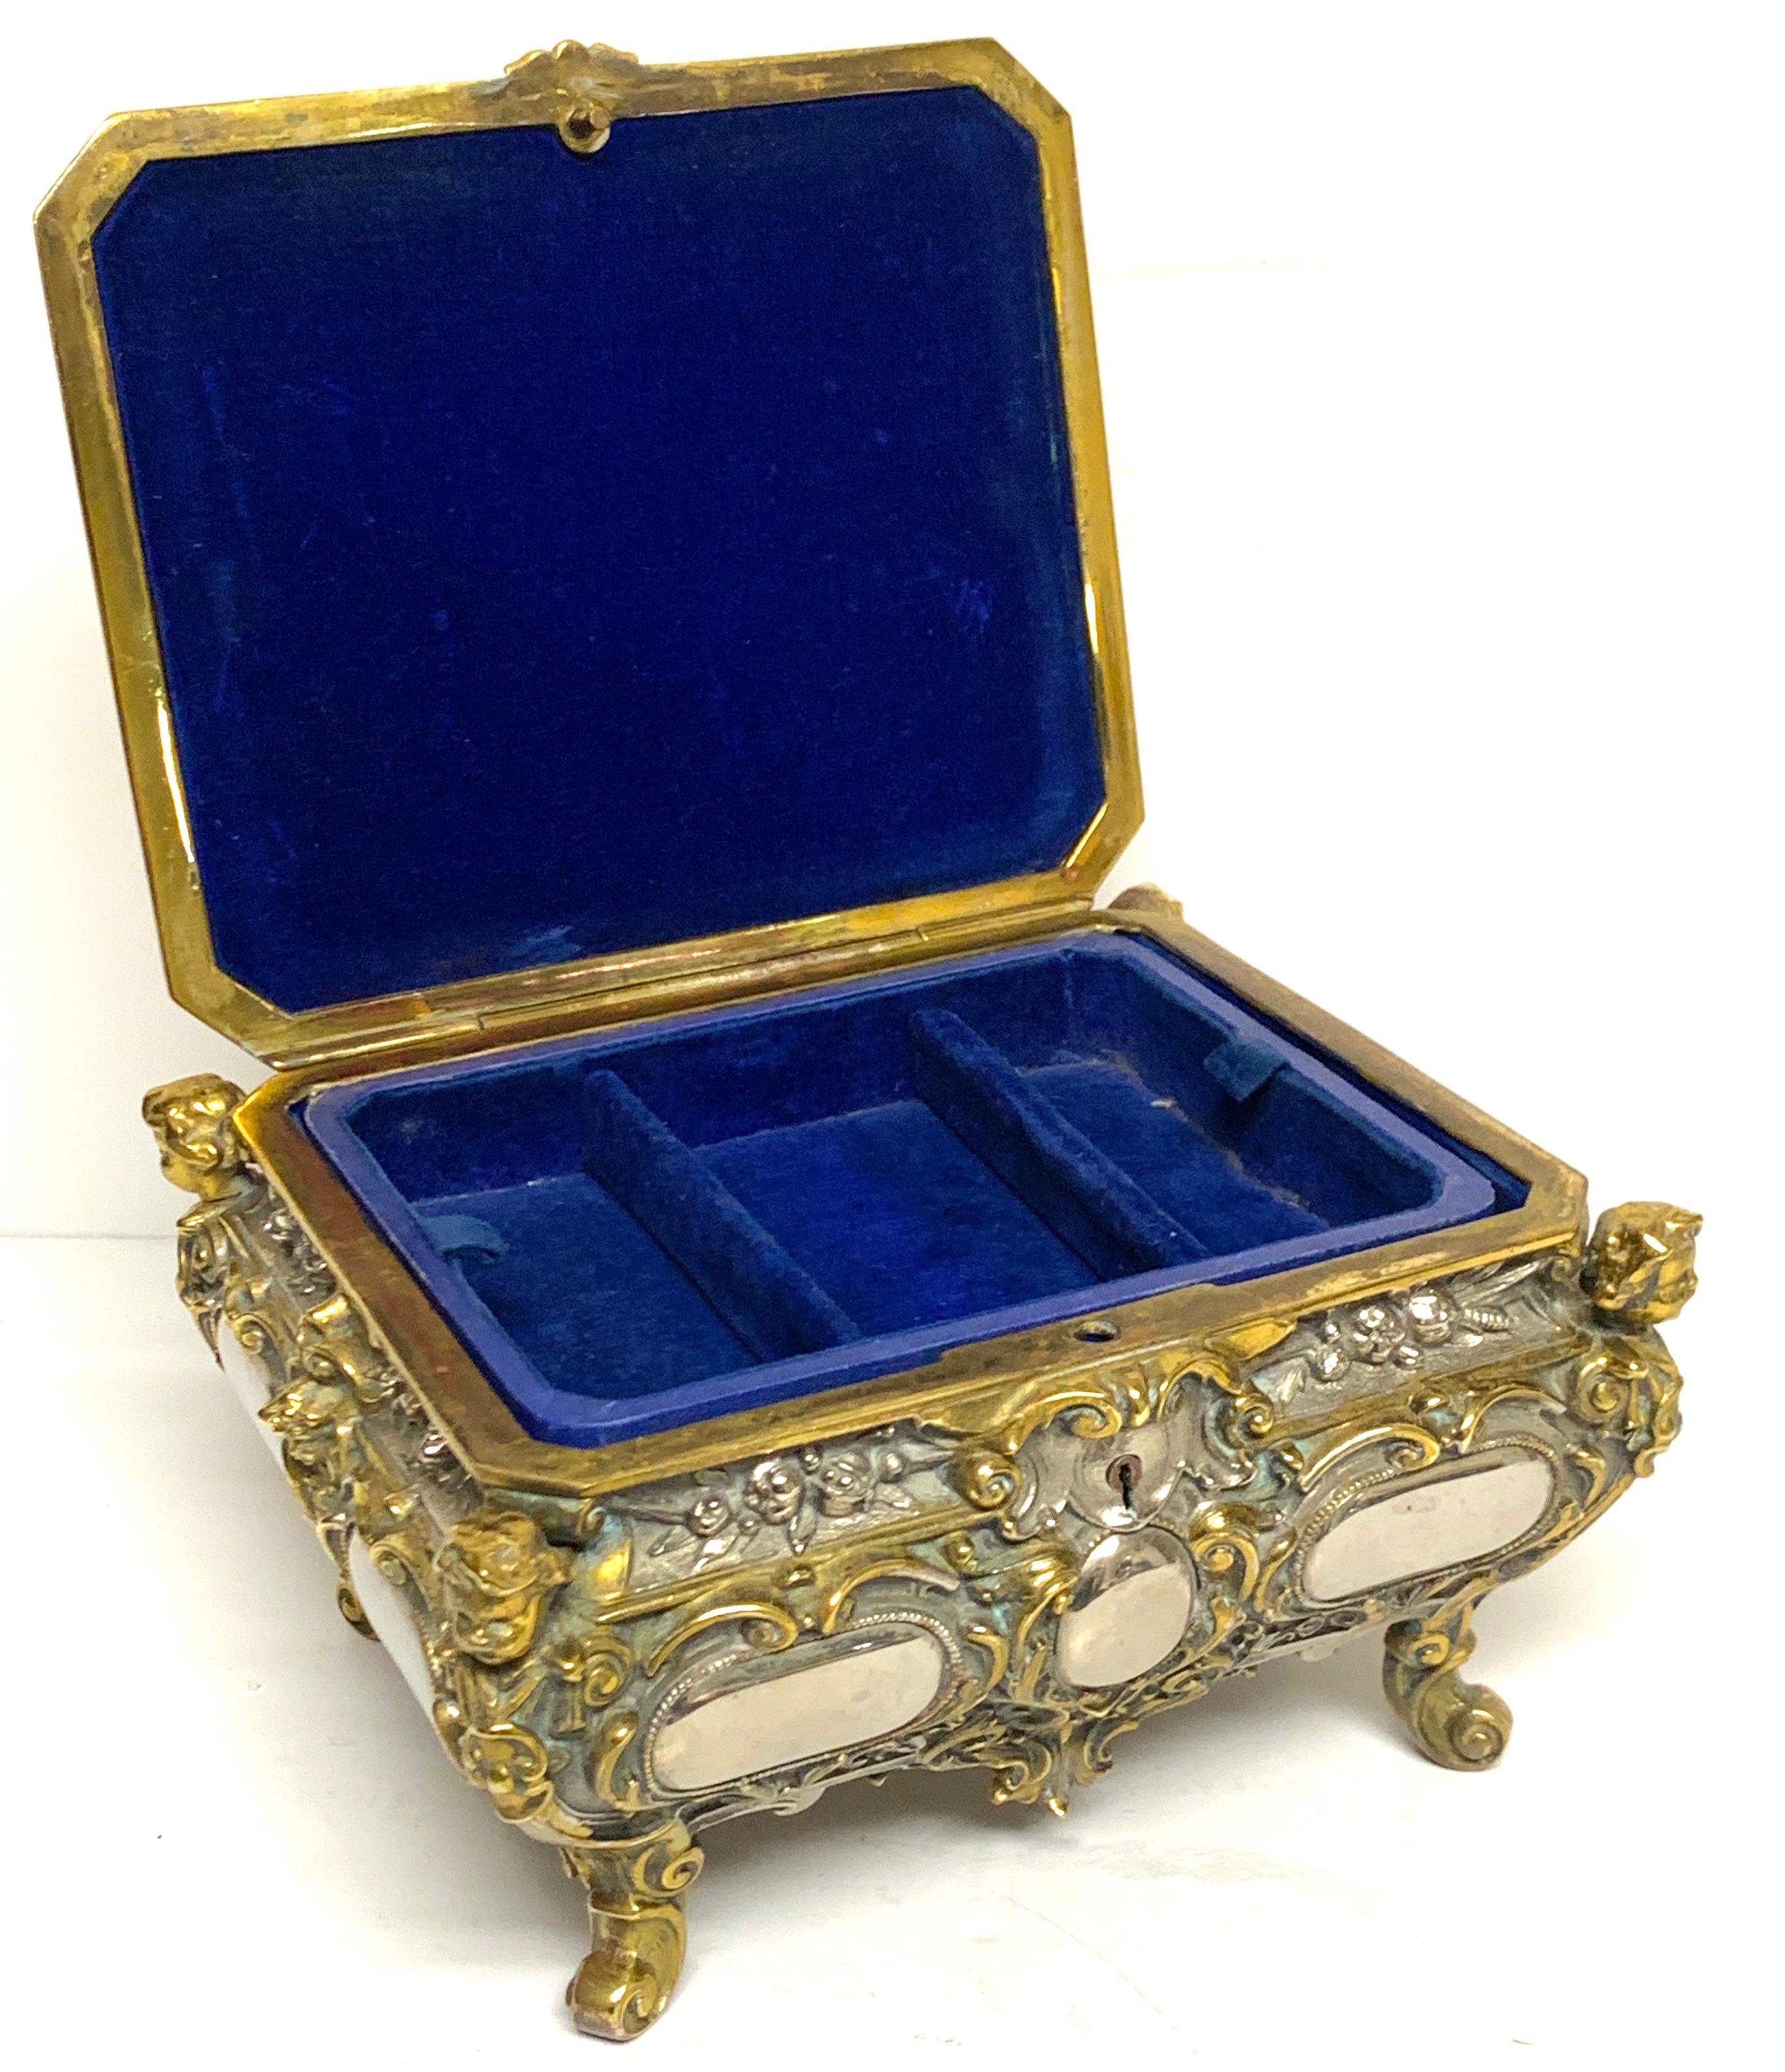 Magnificent Silvered Bronze and Ormolu Jewelry/Table Box For Sale 5